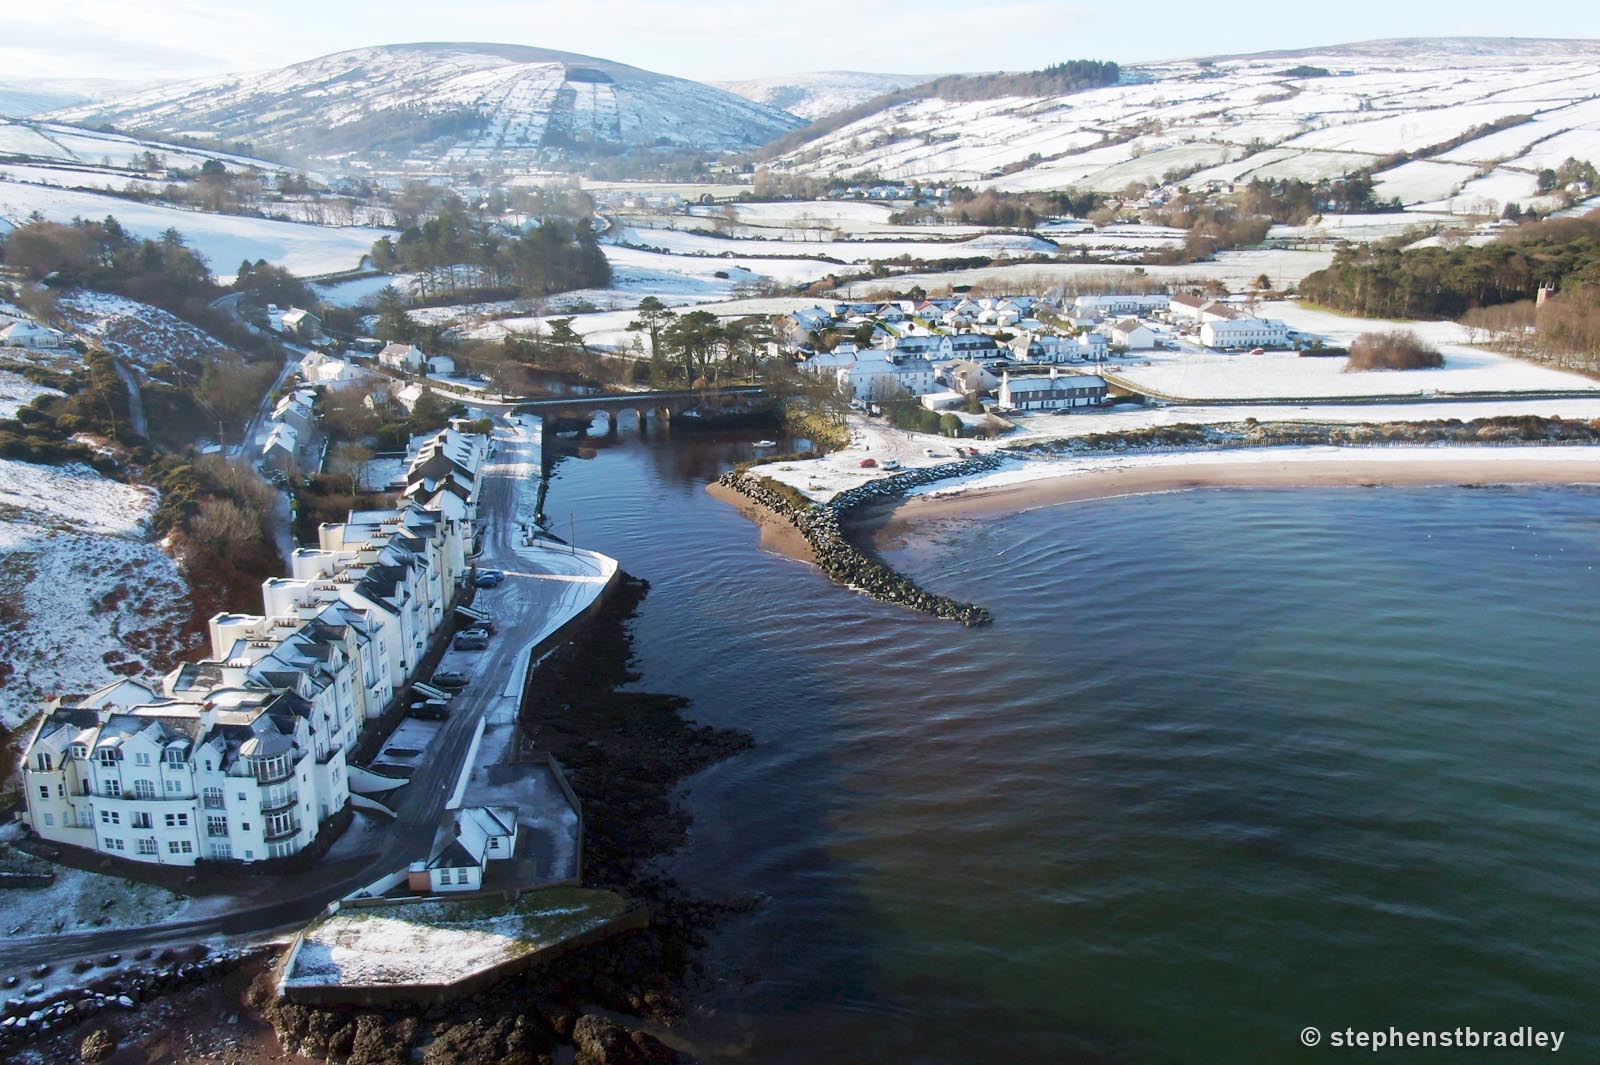 Aerial drone photography and video production services Dublin and Ireland portfolio - Cushendun village under snow in winter, video screenshot 5